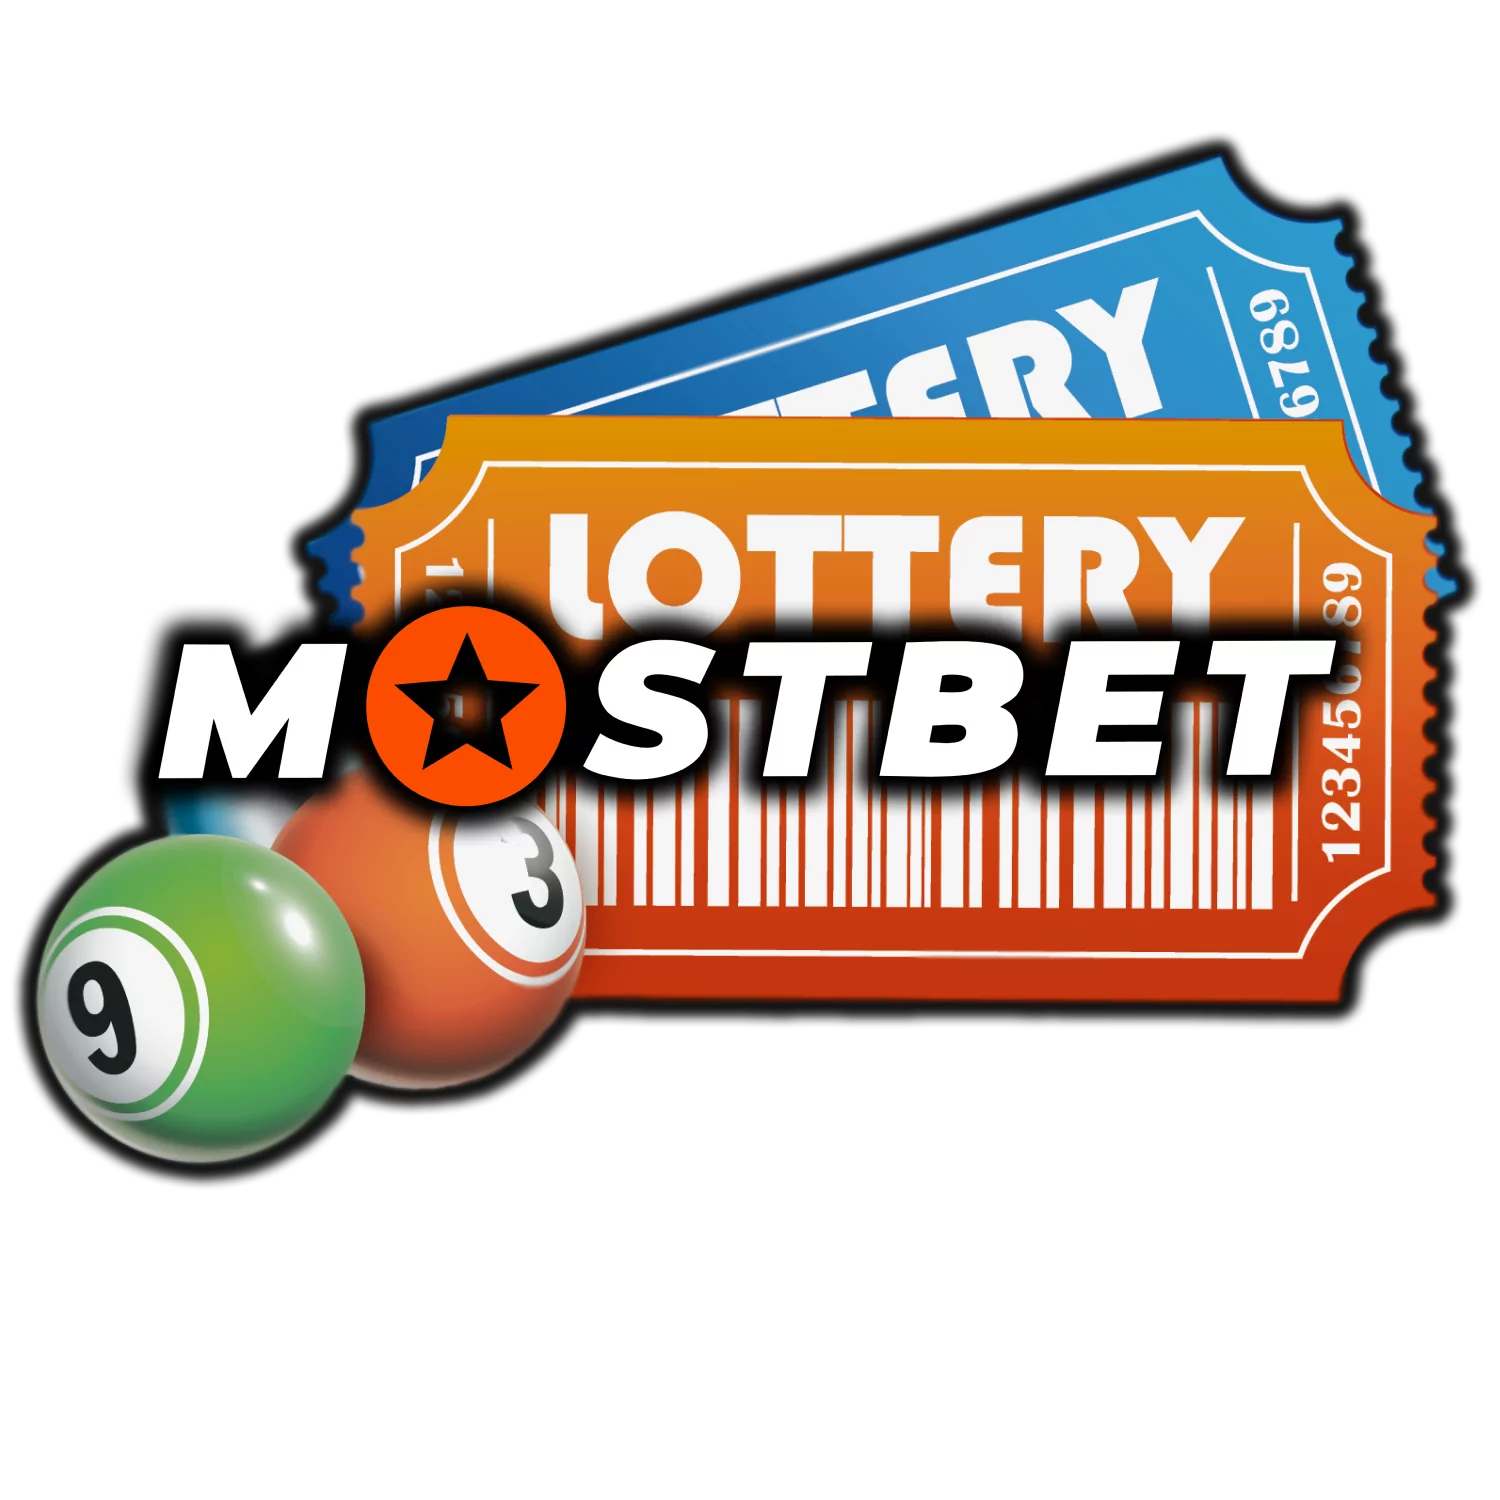 With Mostbet, play lotteries.